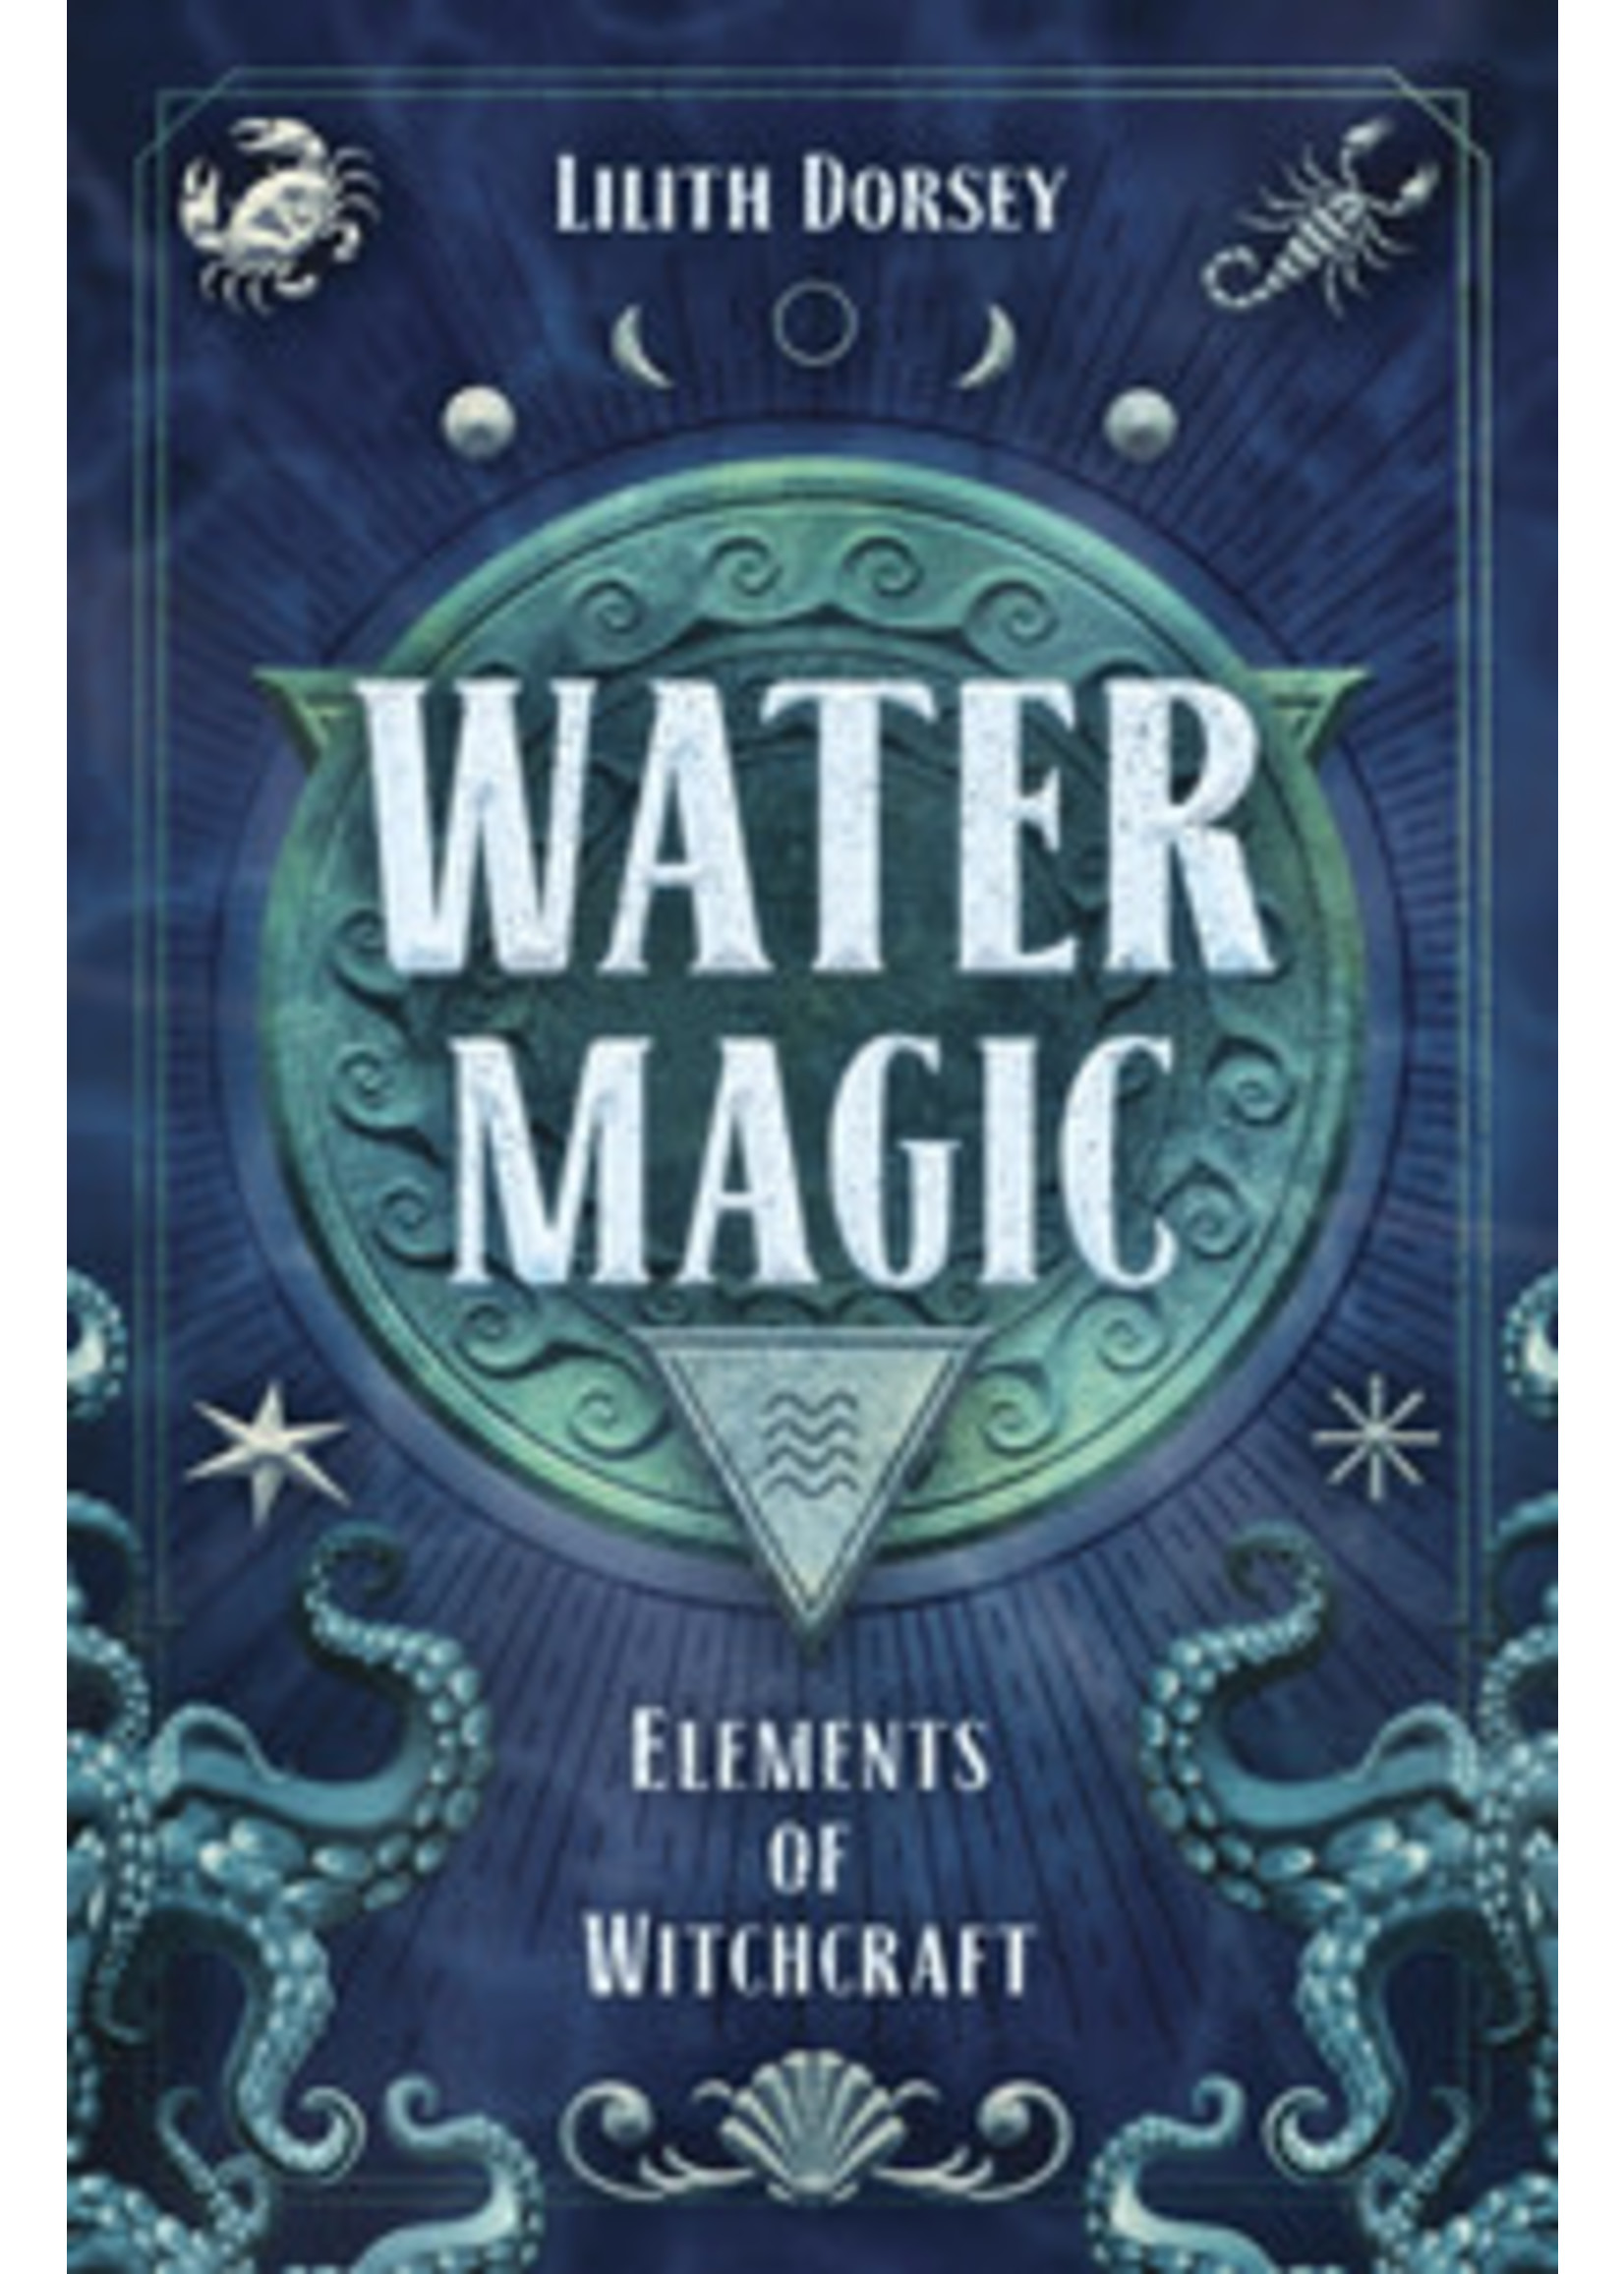 Water Magic: Elements of Witchcraft by Lilith Dorsey